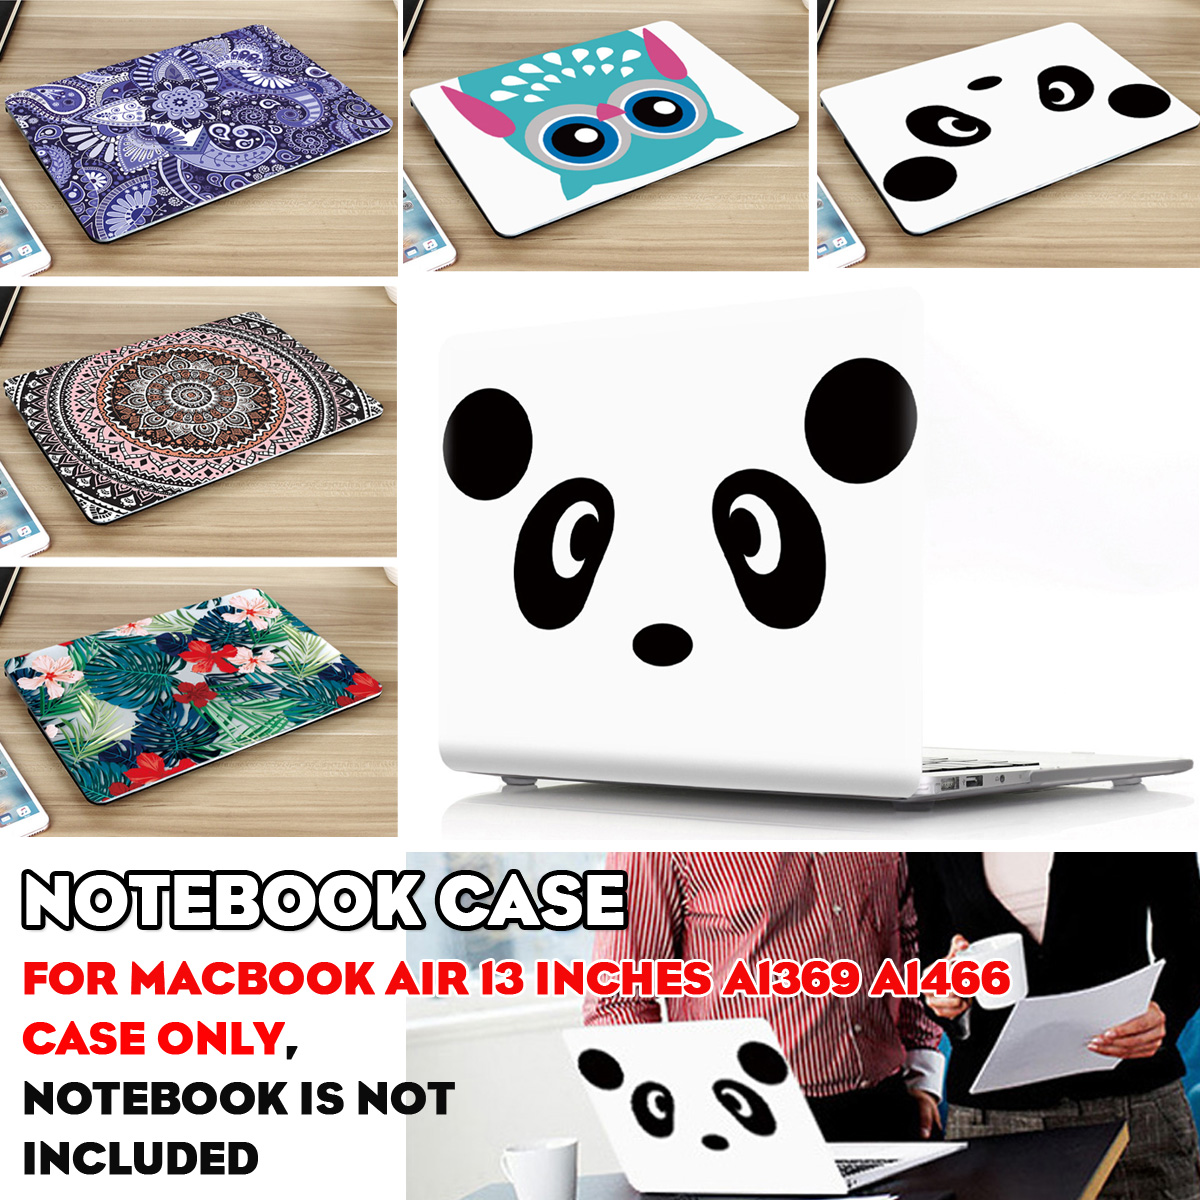 Bakeey-Colour-Cartoon-Printing-Shell-Upper-Cover-and-Bottom-Laptop-Tablet-Protective-Case-for-Macboo-1634635-1